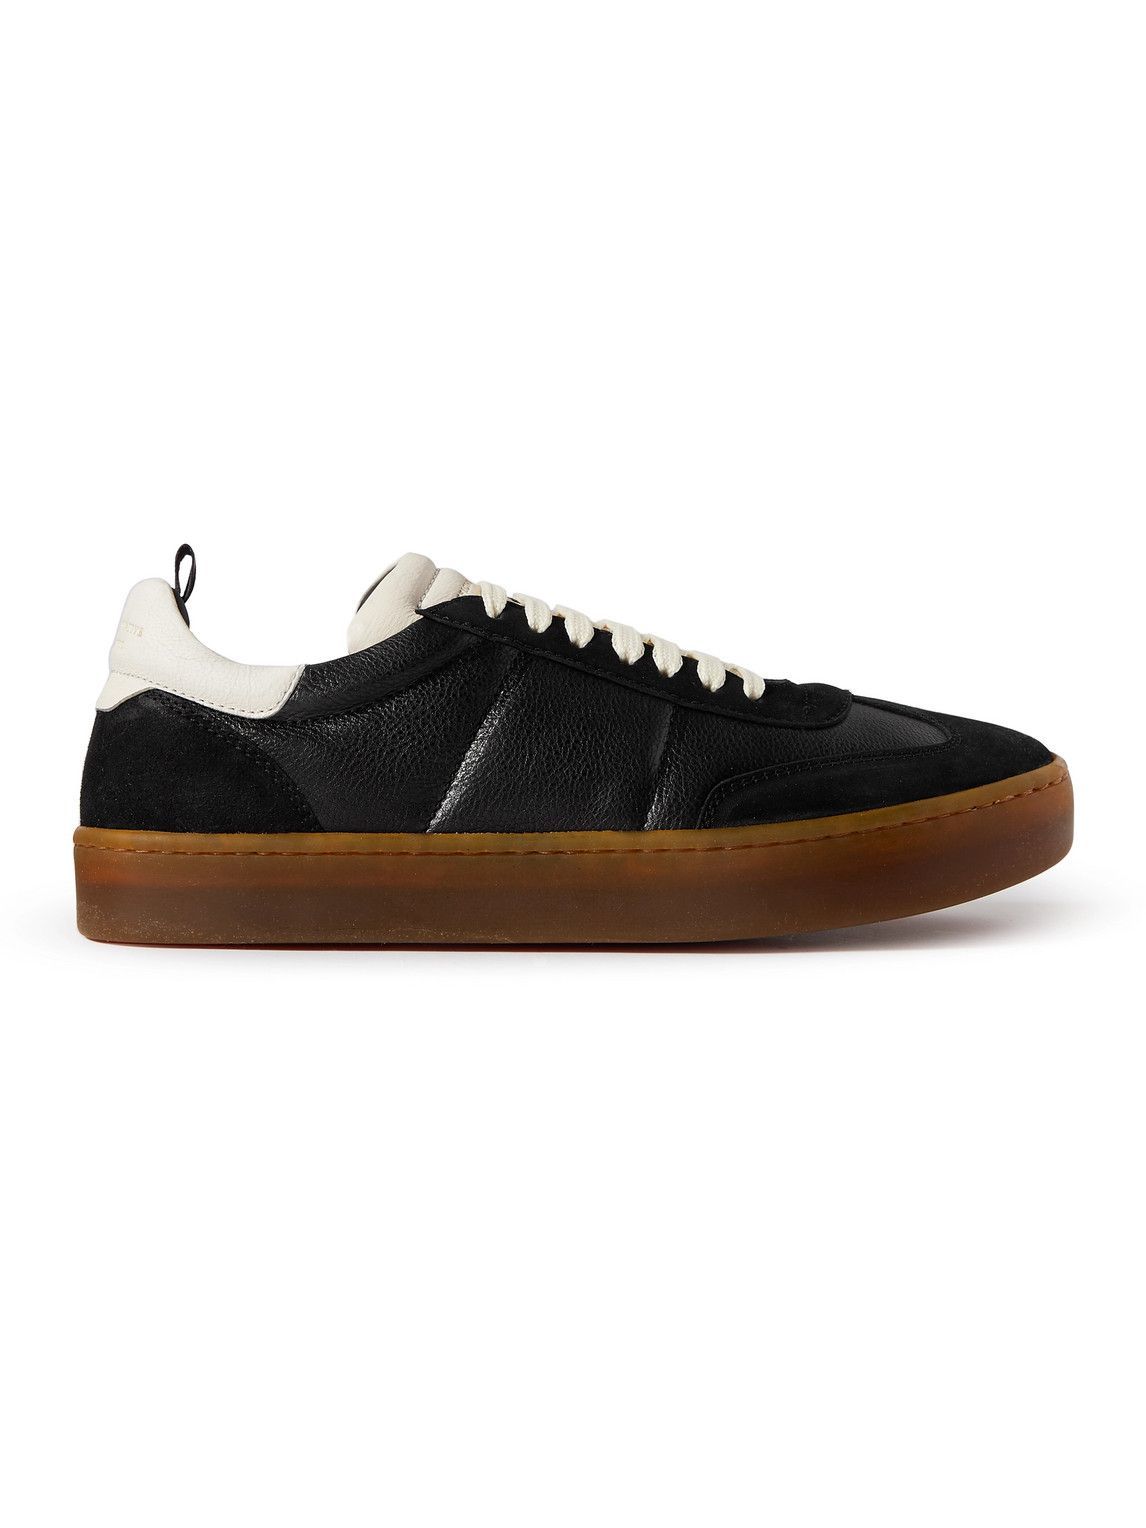 Officine Creative - Kombined Leather and Suede Sneakers - Black ...